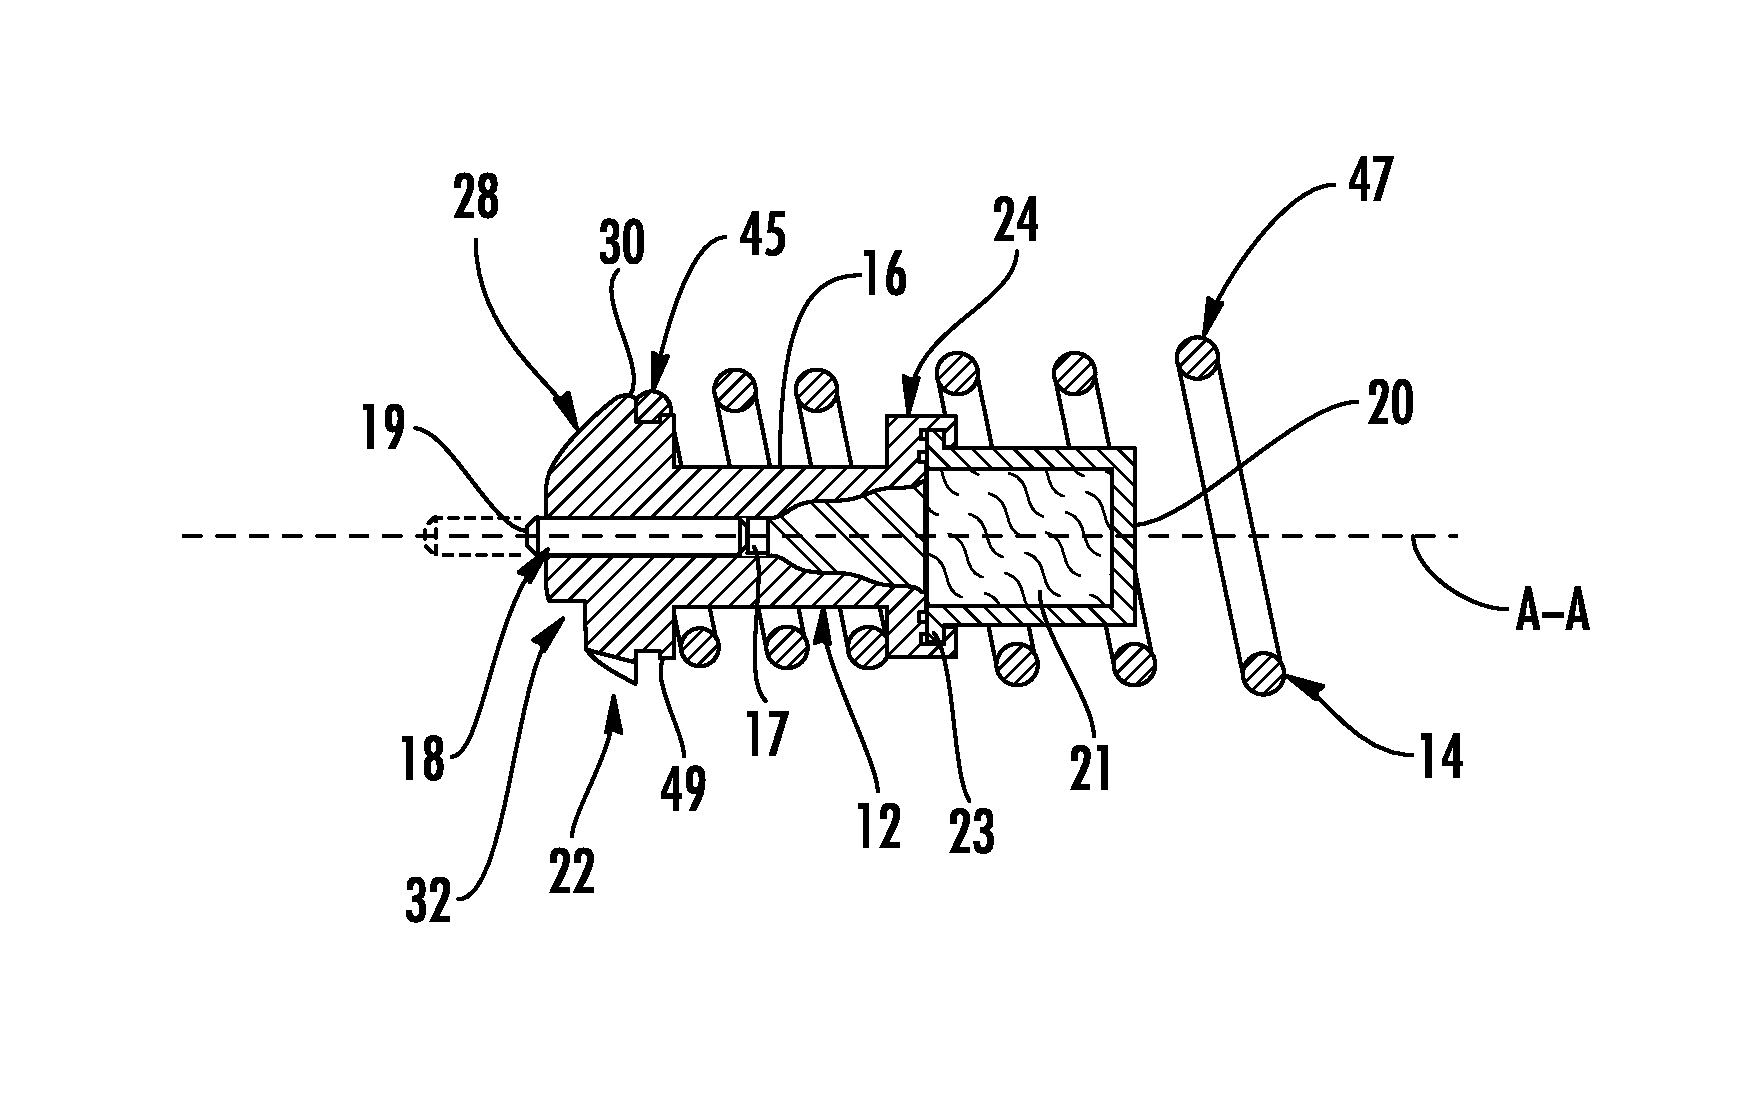 Thermally actuated power element with integral valve member